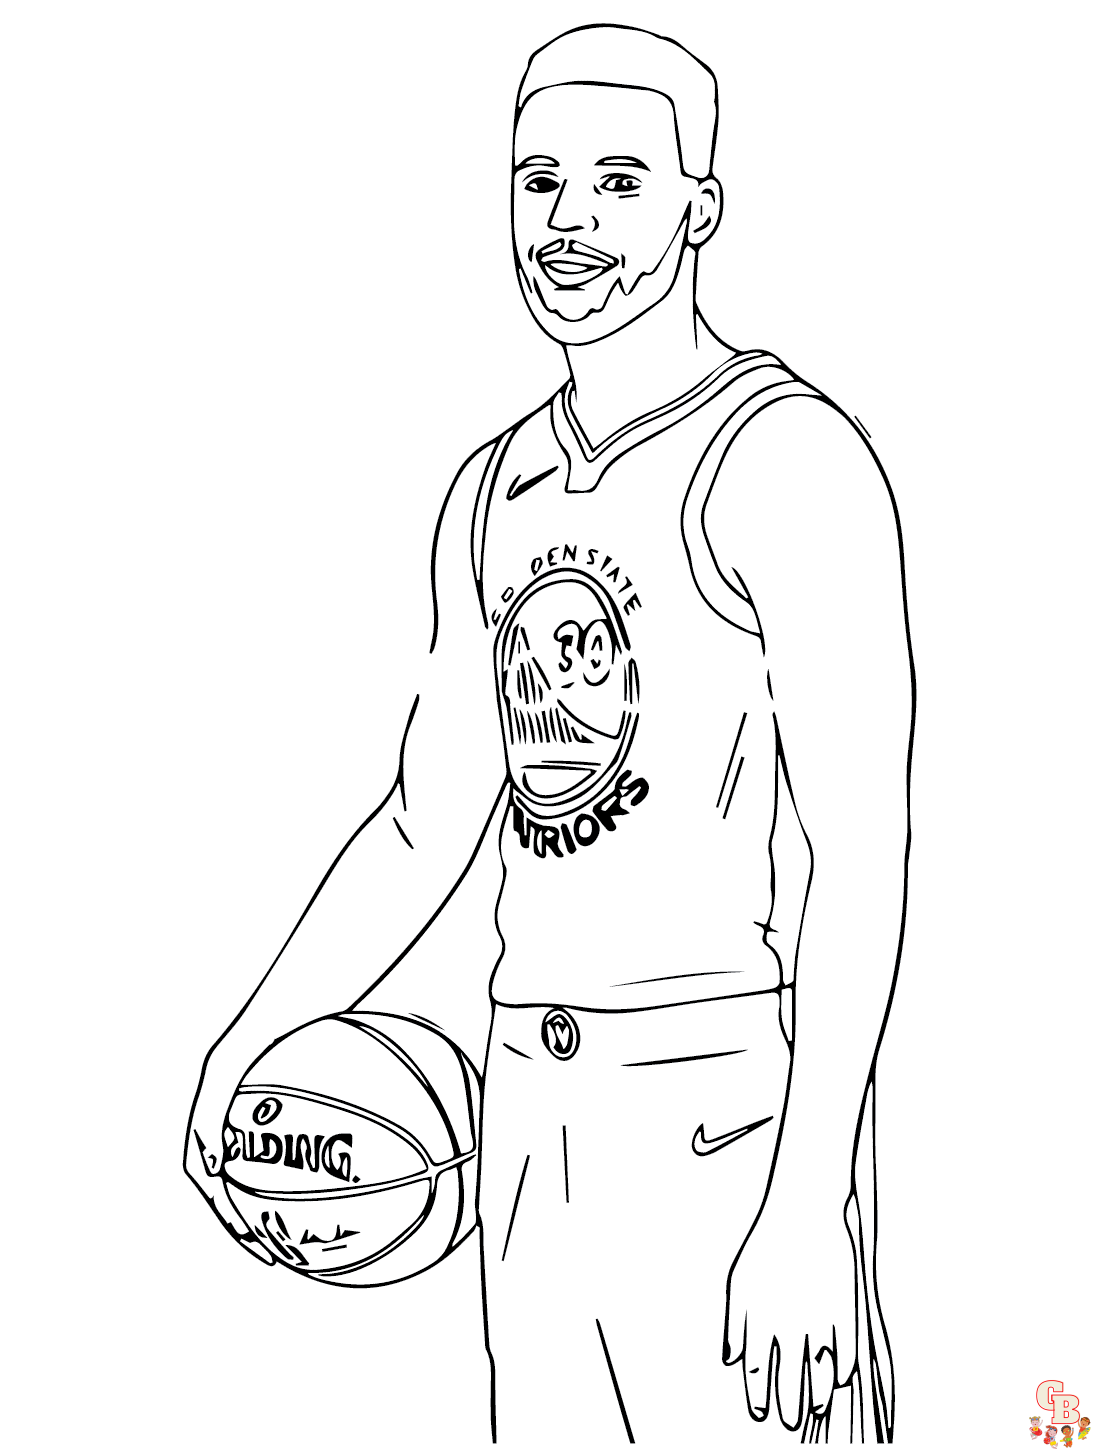 Stephen Curry coloring pages printable